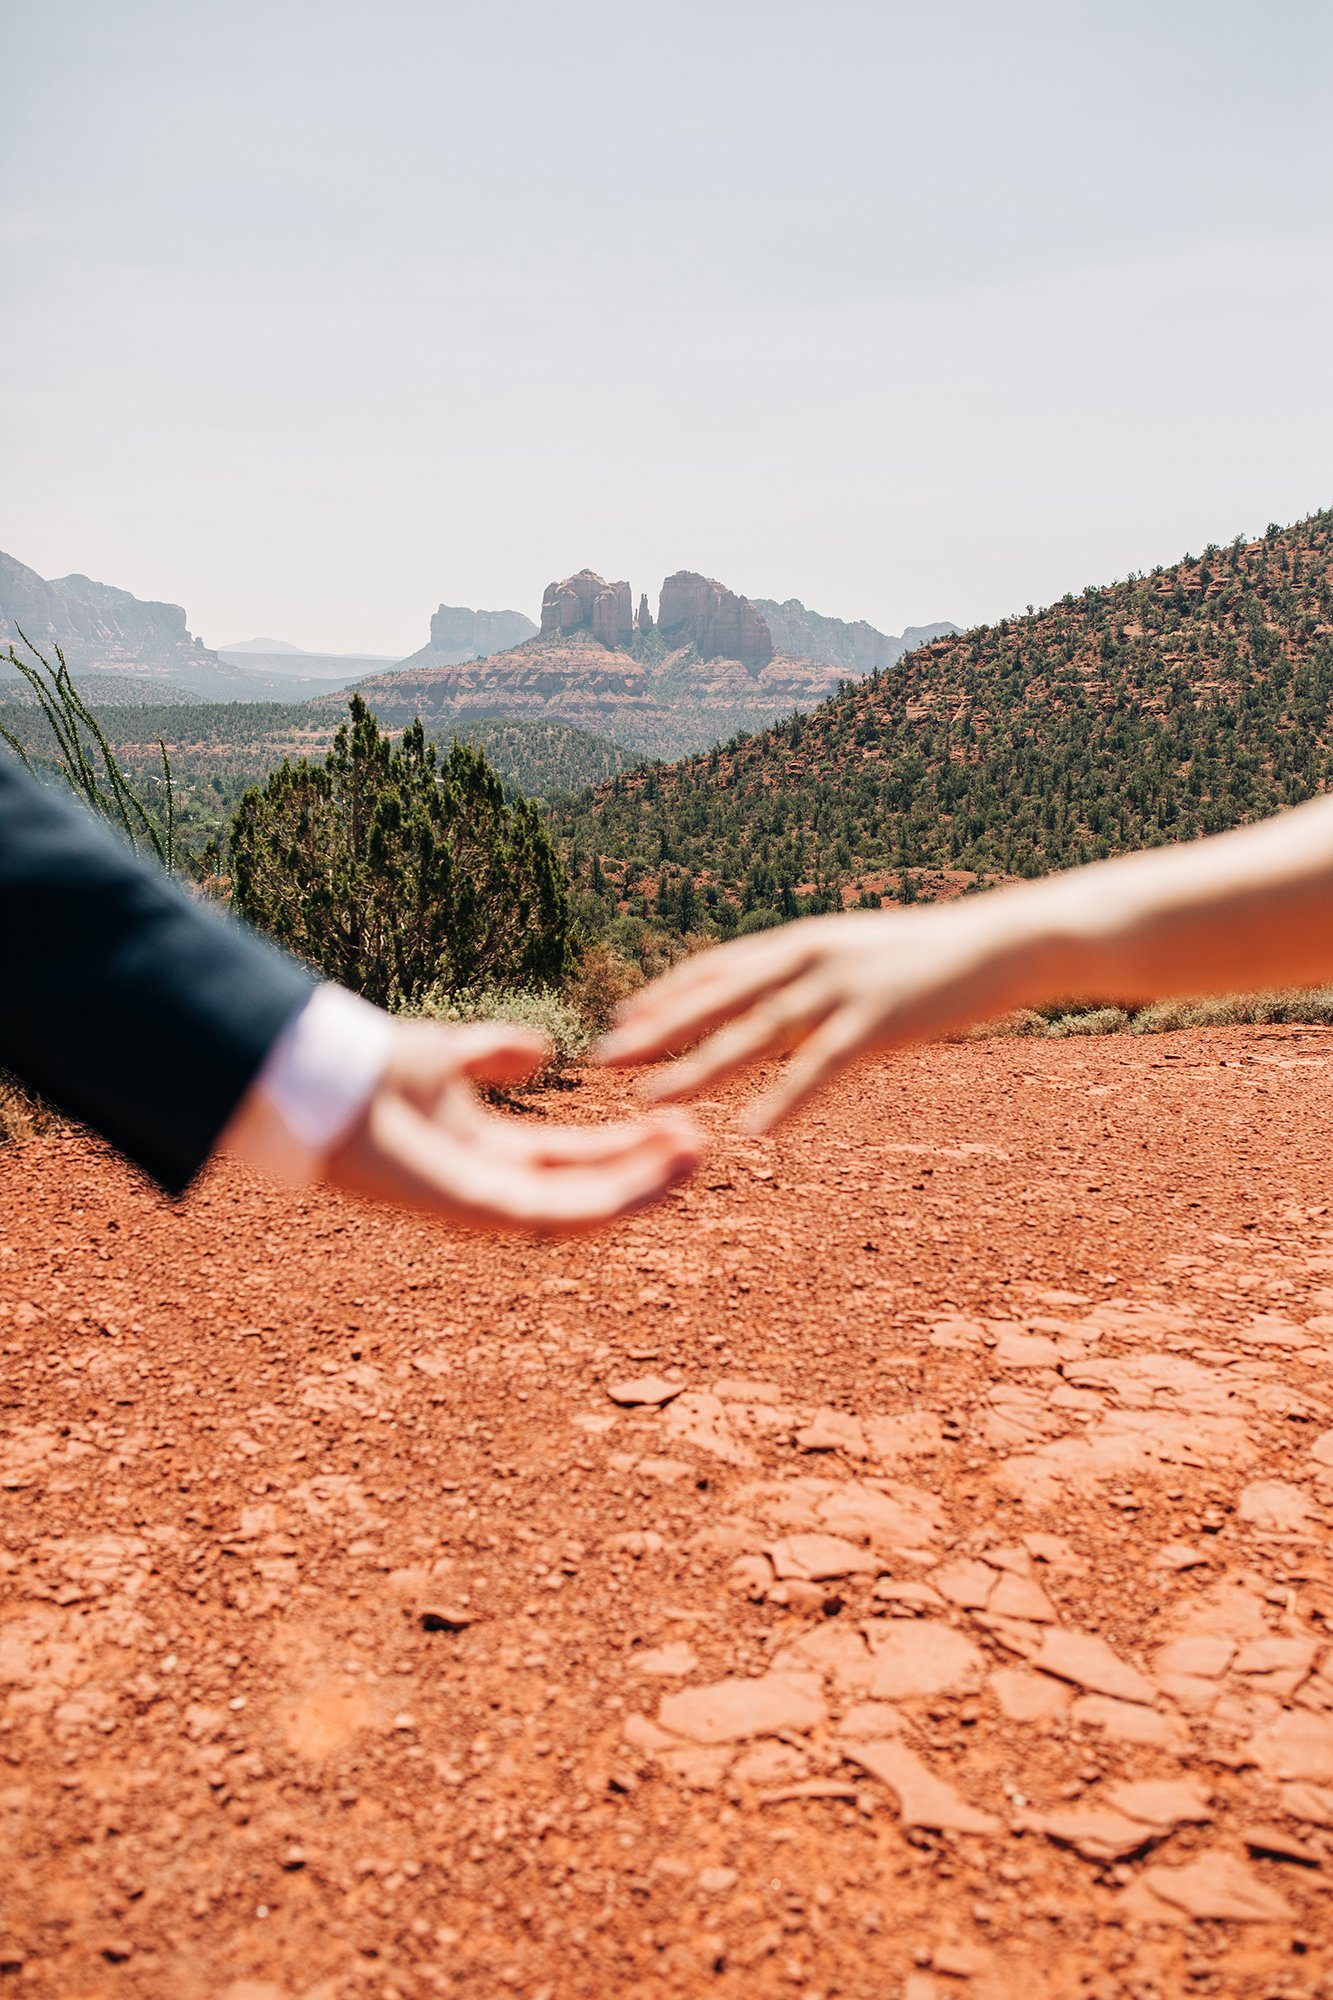 Newly wed couple reaches out to each other in this artistic Sedona wedding photograph